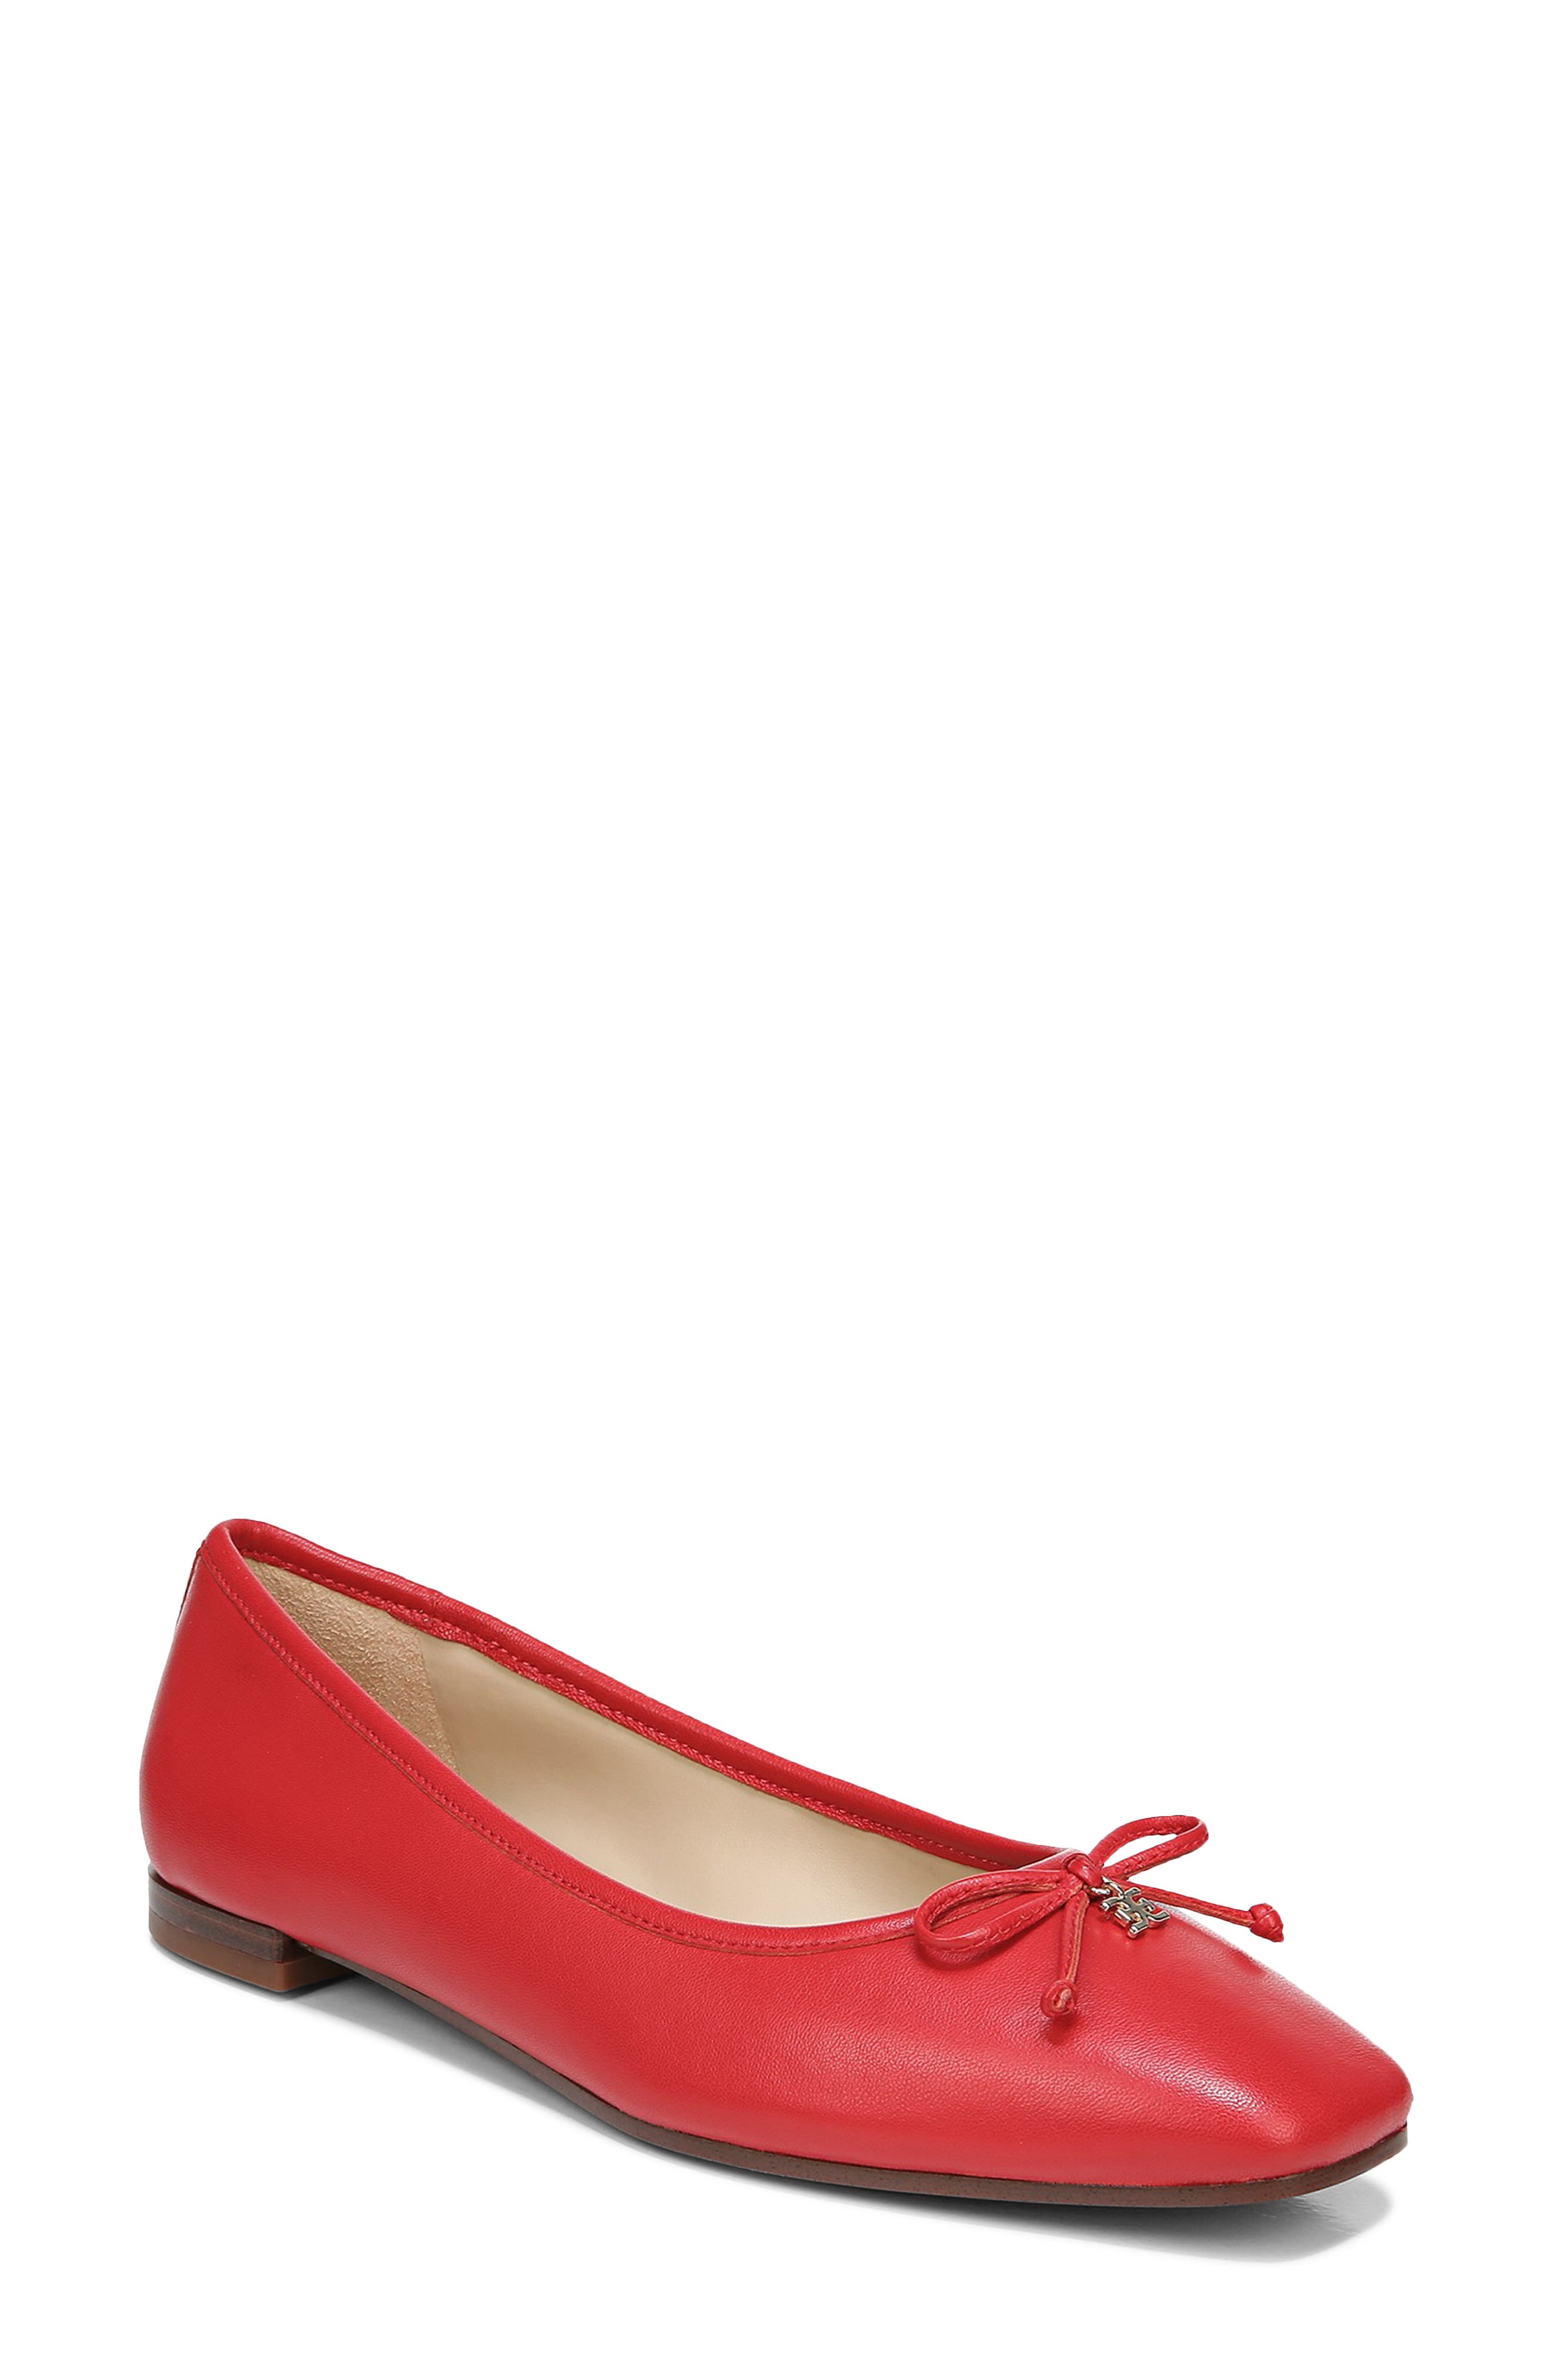 nordstrom red flats